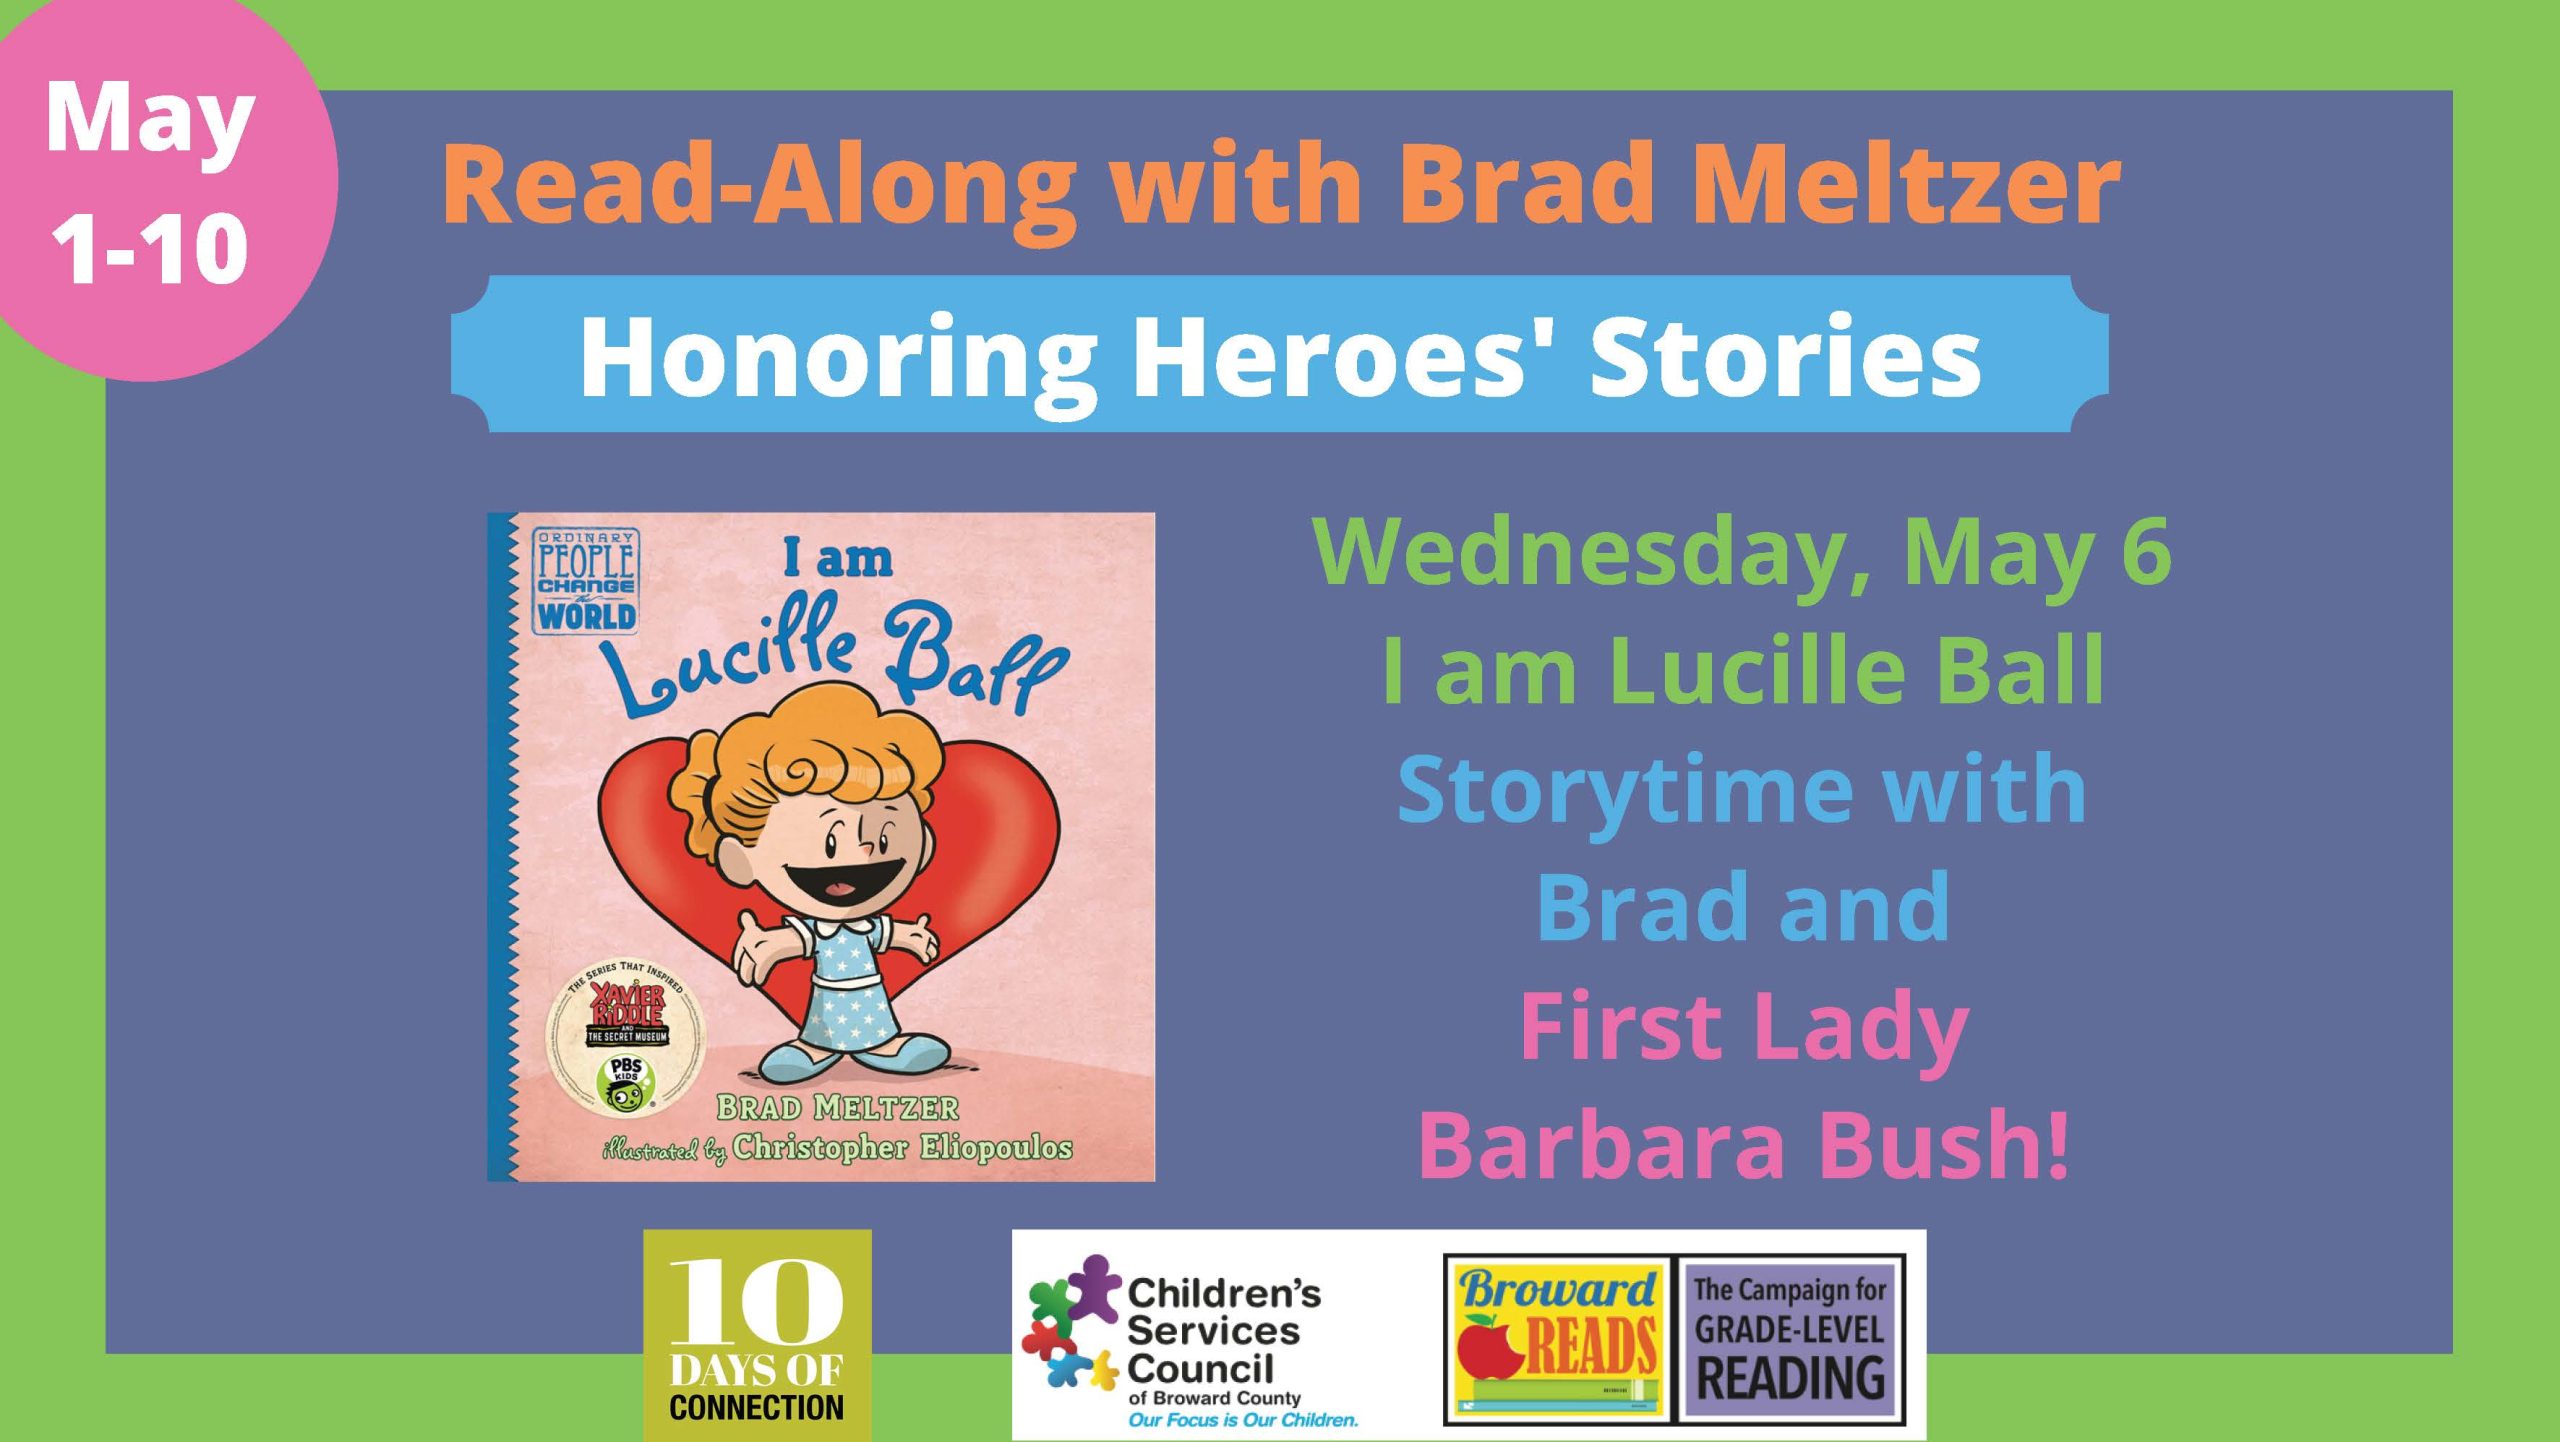 read along with brad meltzer image 4